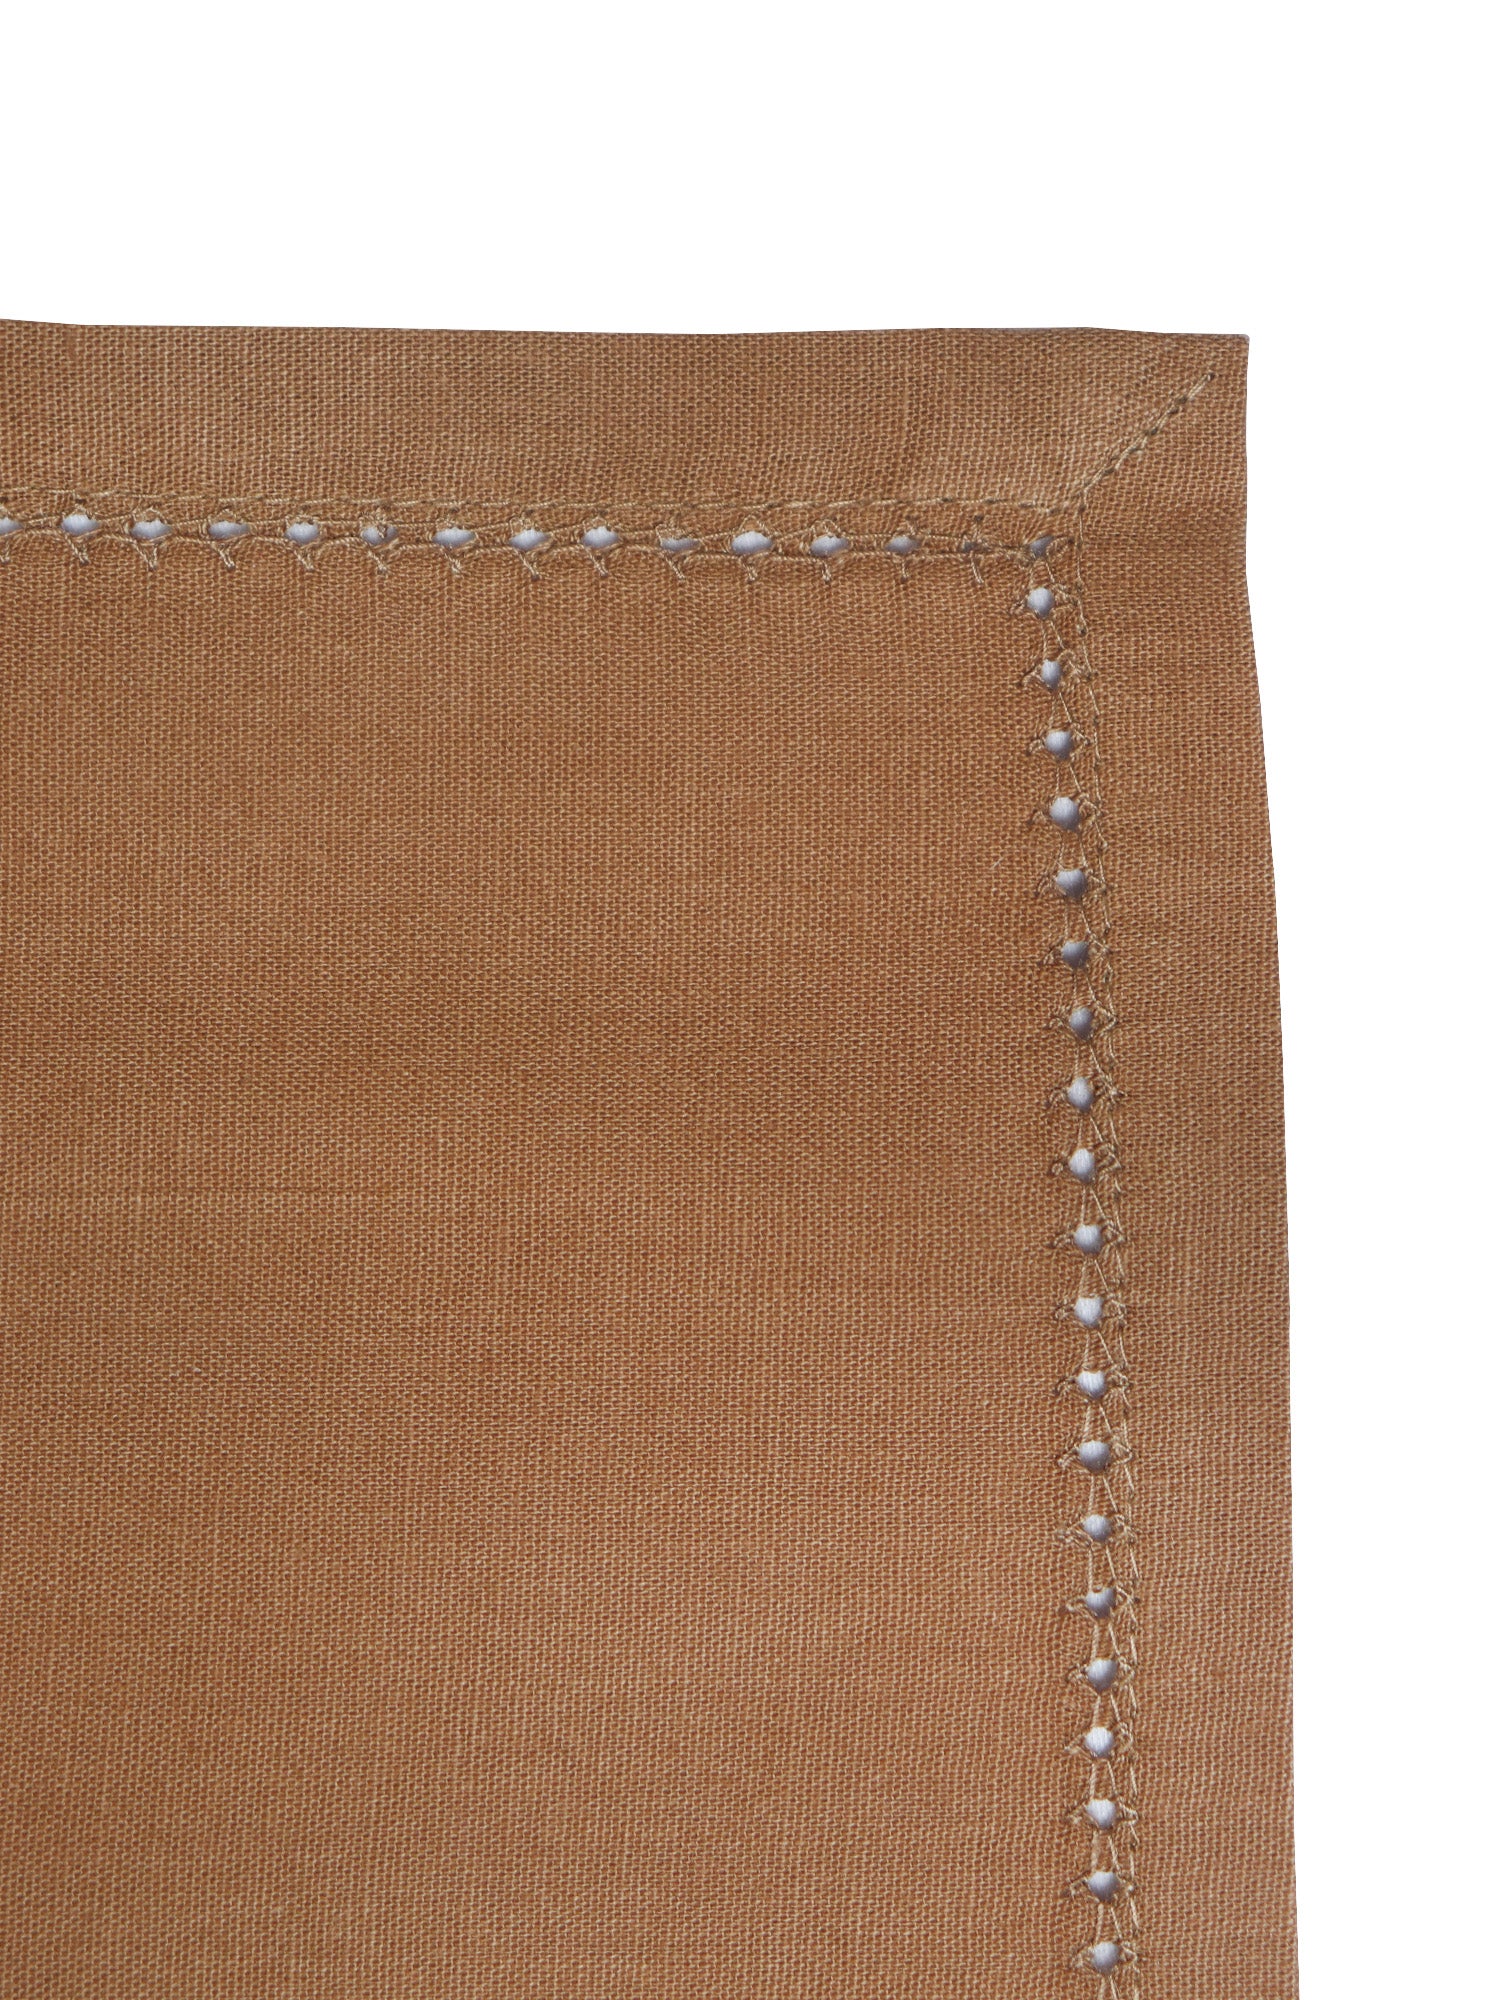 closeup of fagotting embroidered set of 6 dinner napkins in golden brown color - 16x16 inch